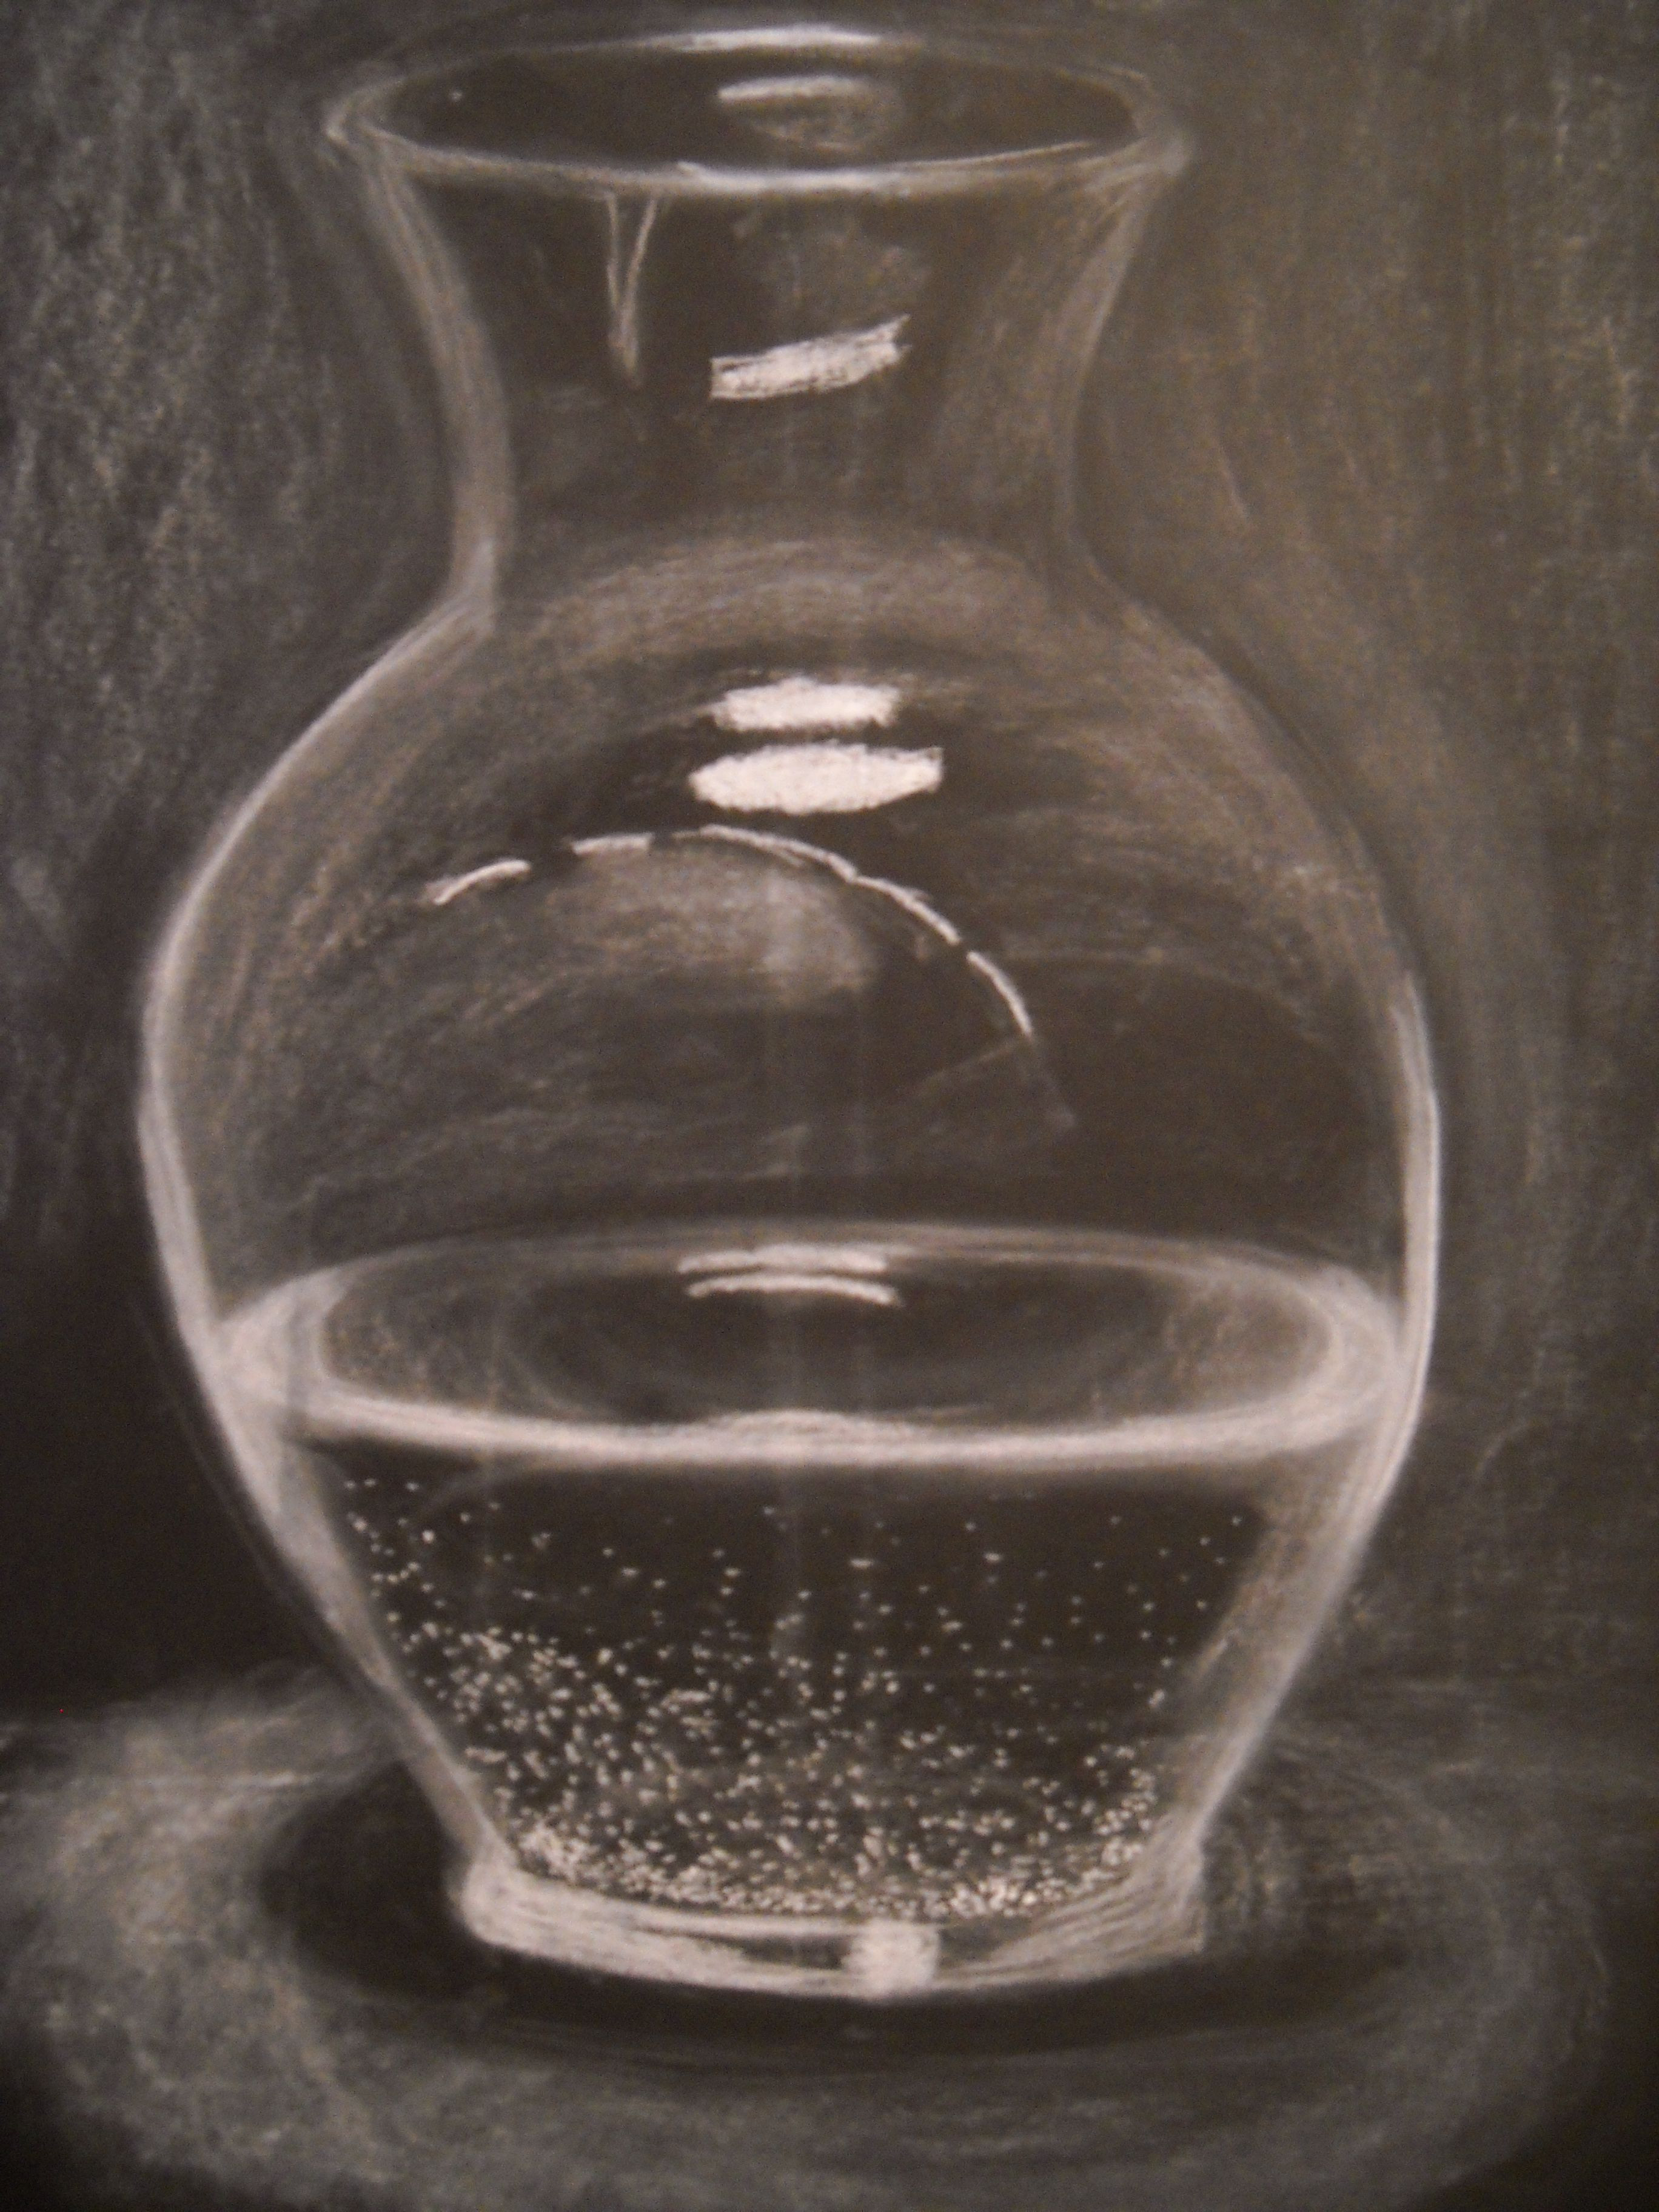 how to repair cracked glass vase of glass vase filled with water done in white chalk on black drawing in glass vase filled with water done in white chalk on black drawing paper